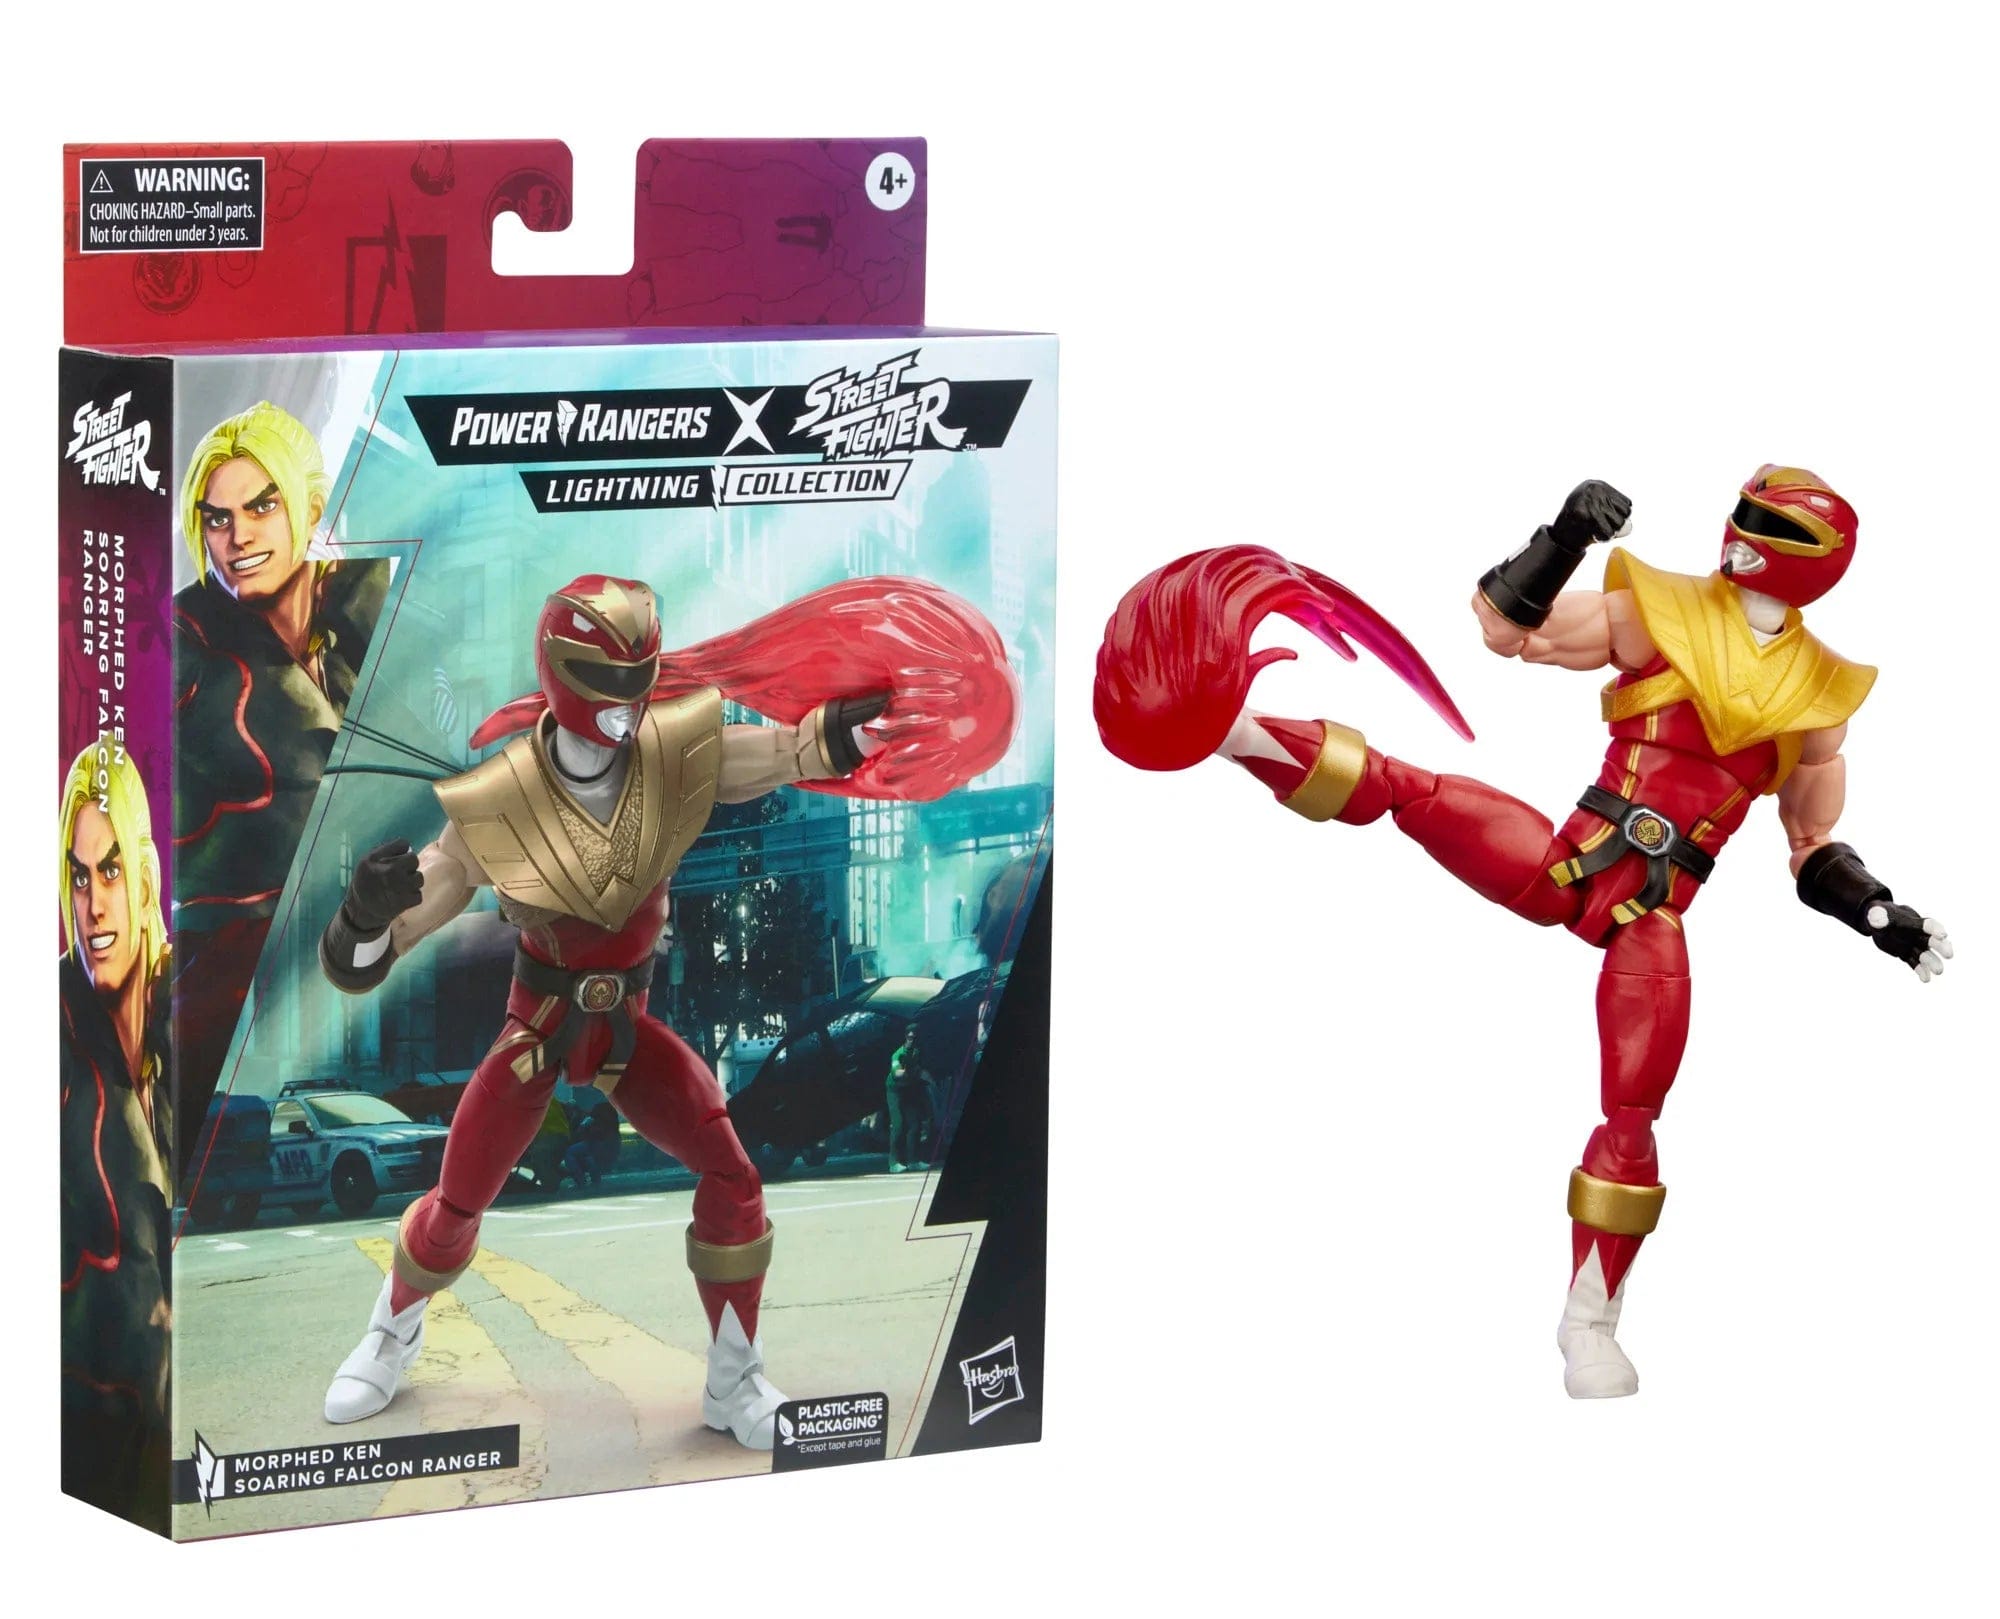 Power Rangers X Street Fighter Lightning Collection Morphed Ken Soaring Falcon Media Kick and box